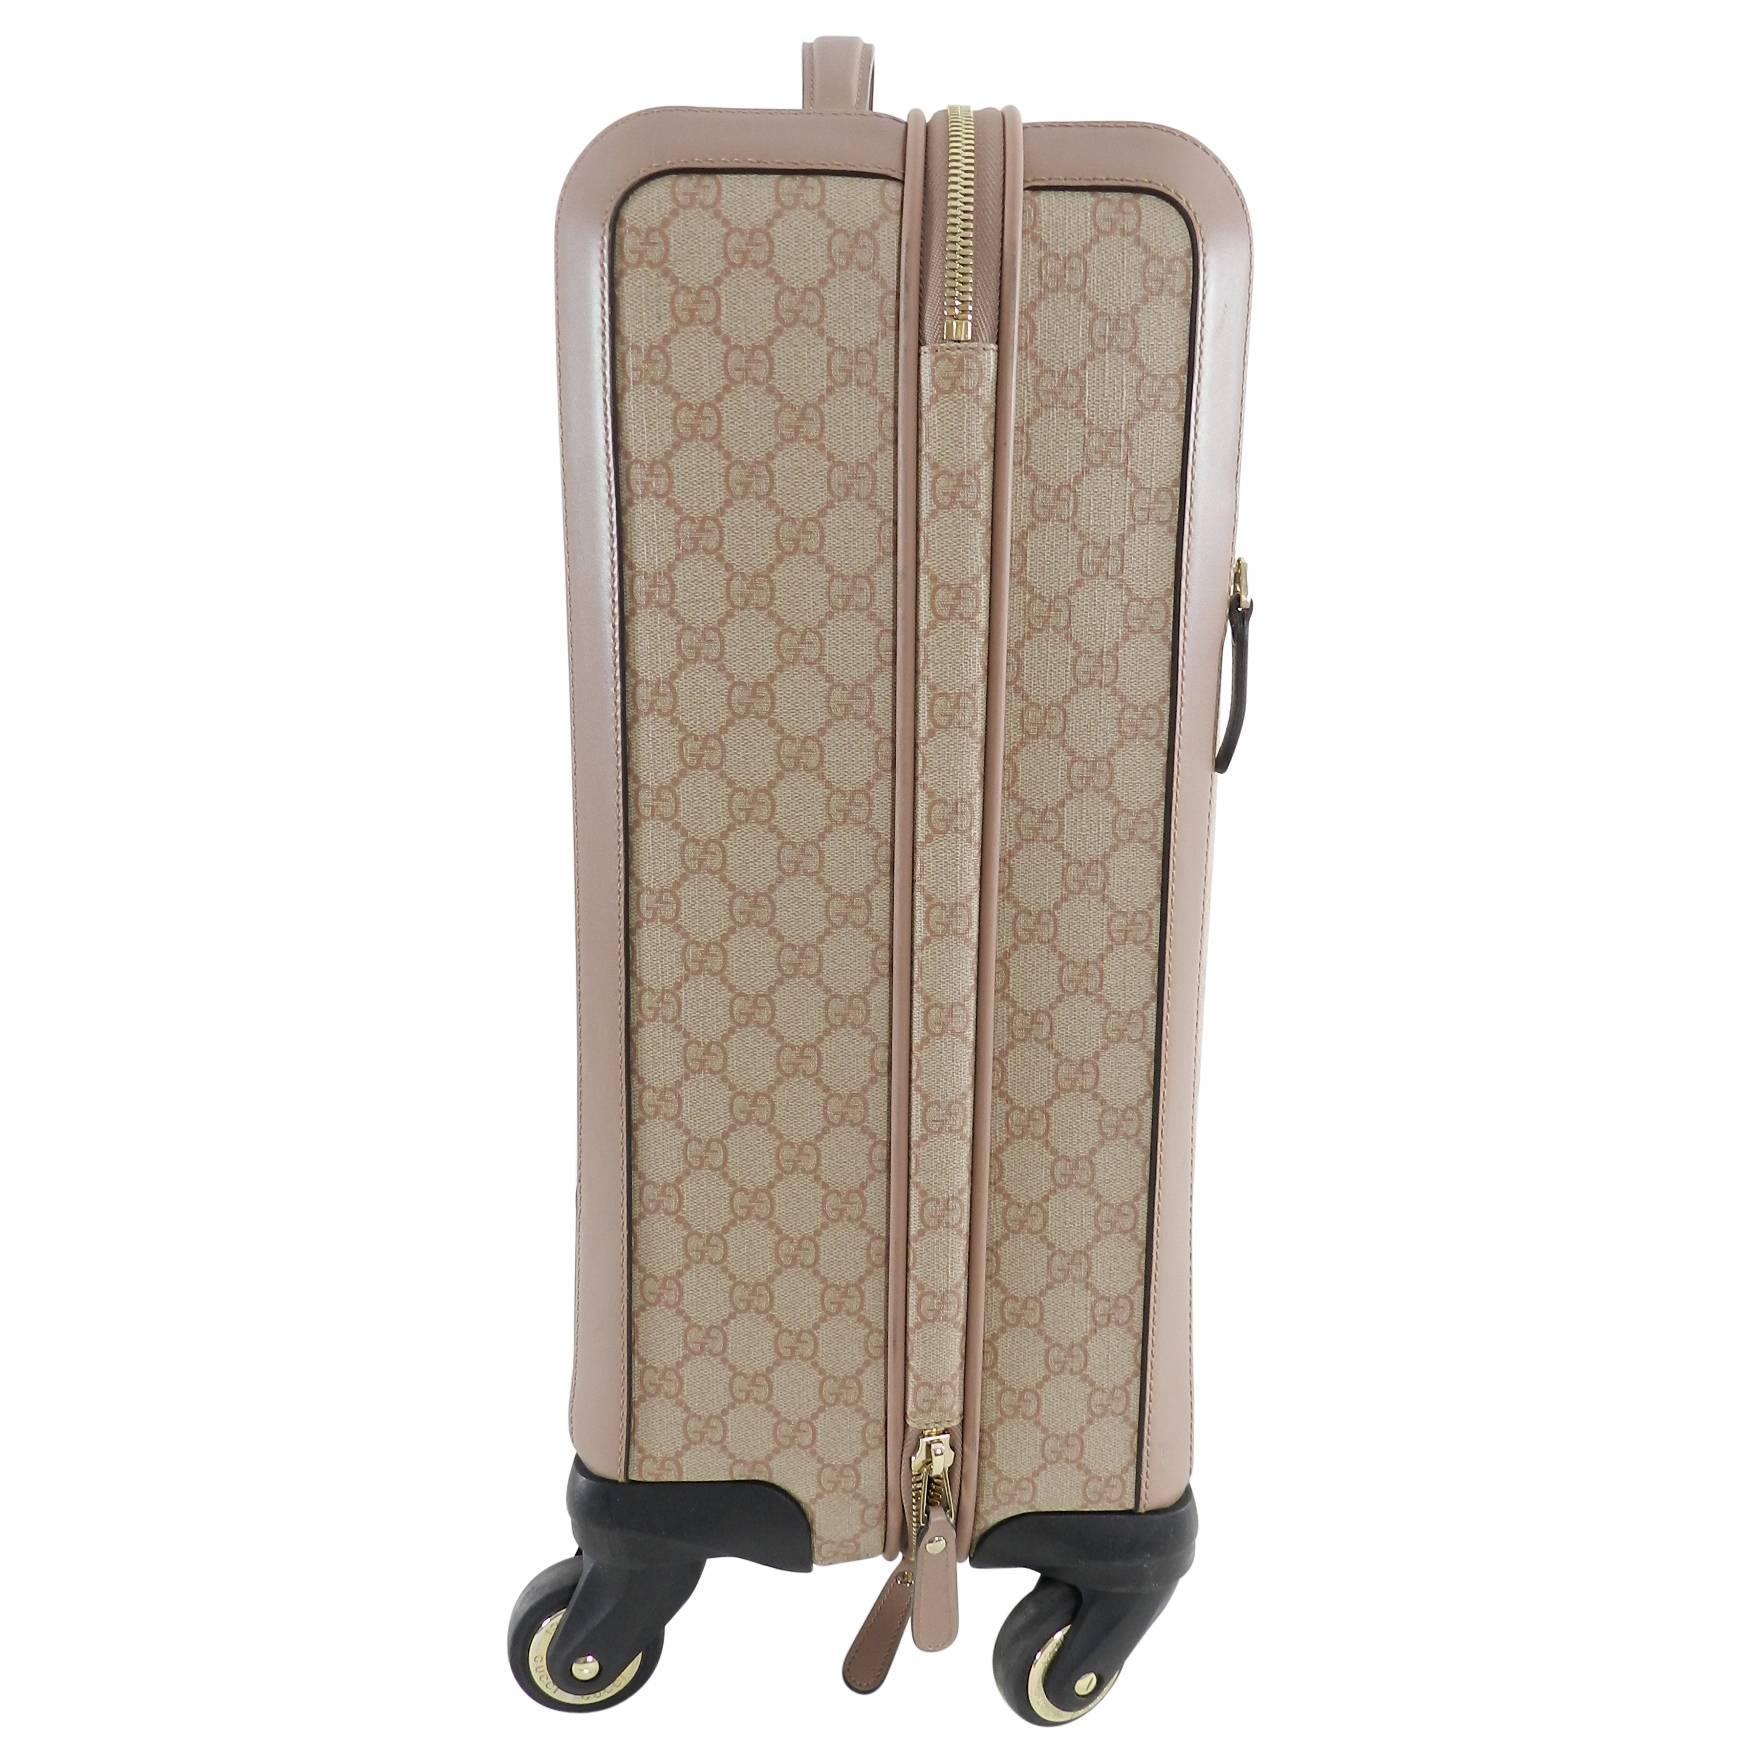 Gucci GG Supreme Monogram 4 Wheel Rolling Carry-on Luggage.  Monogram canvas and leather trim in beige and Winter Rose.  Goldtone metal trim, extendable pull-up handle, canvas lined interior. Measures about 21.25